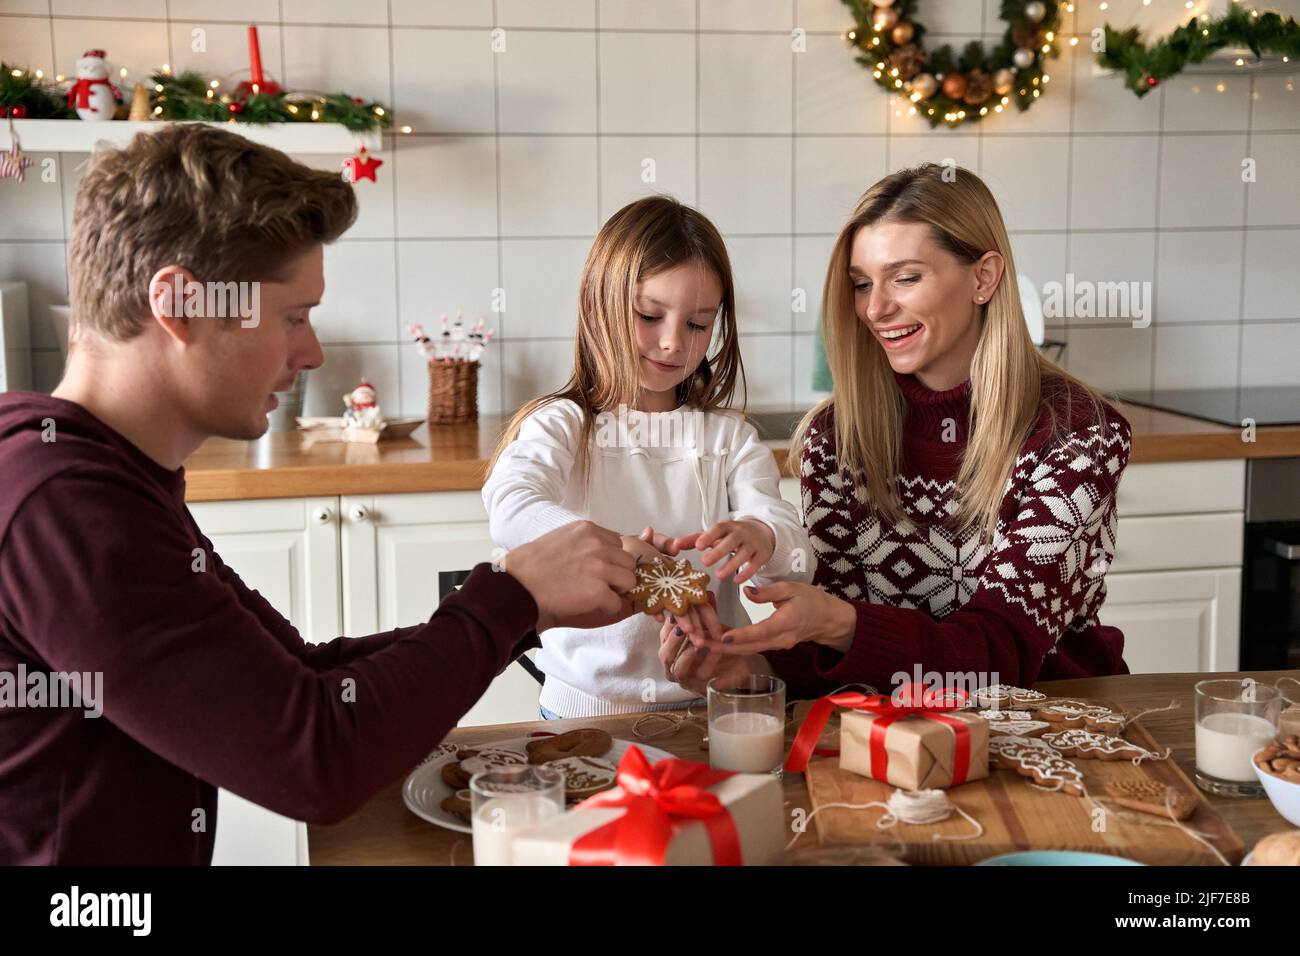 Happy parents and kid daughter having fun making Christmas cookies. Stock Photo